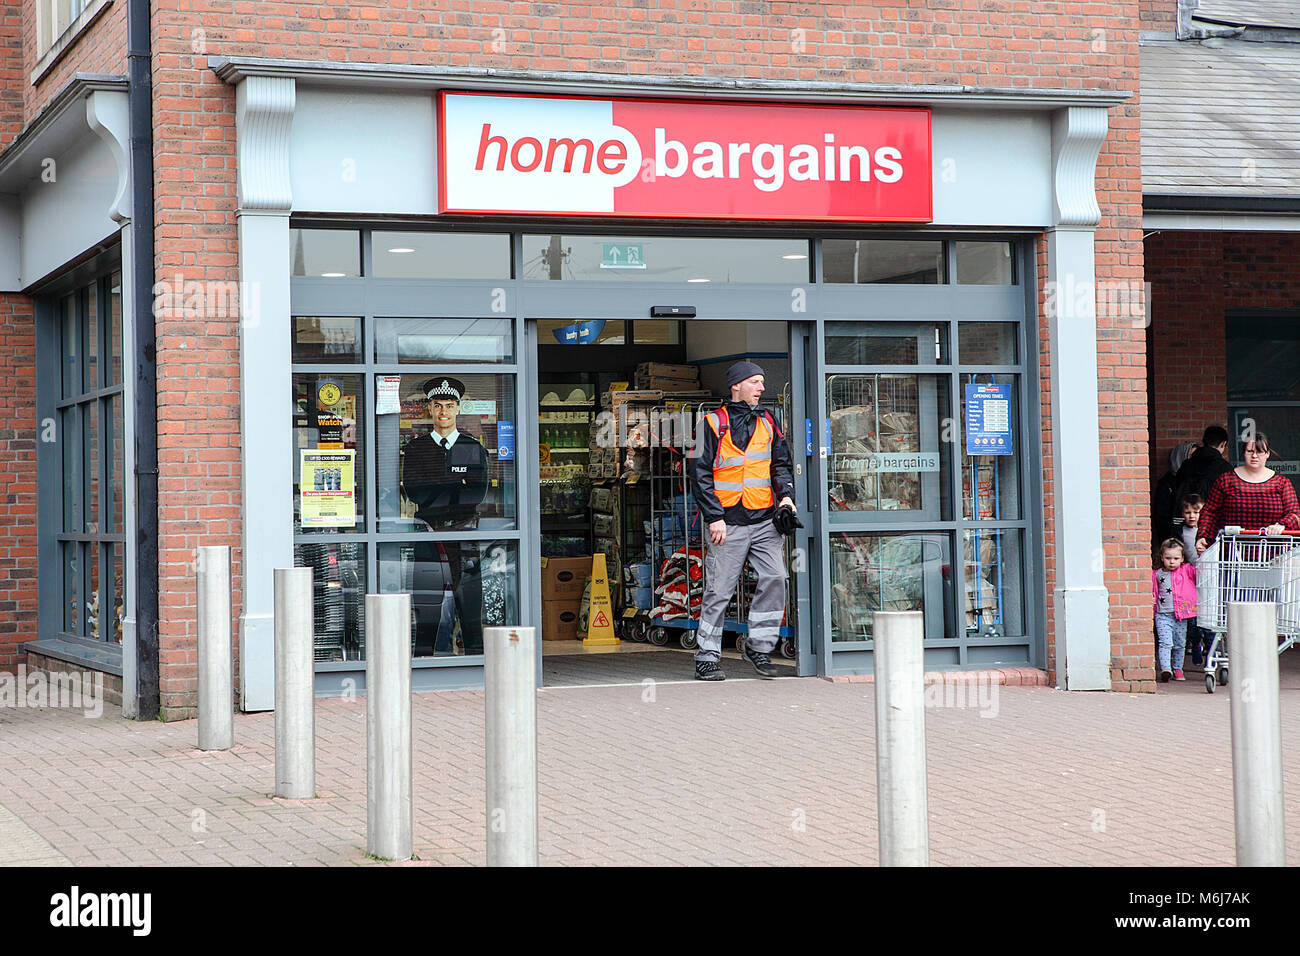 One of (12) images in this small set relating here to Home Bargains in Abbey Foregate in Shrewsbury. Stock Photo